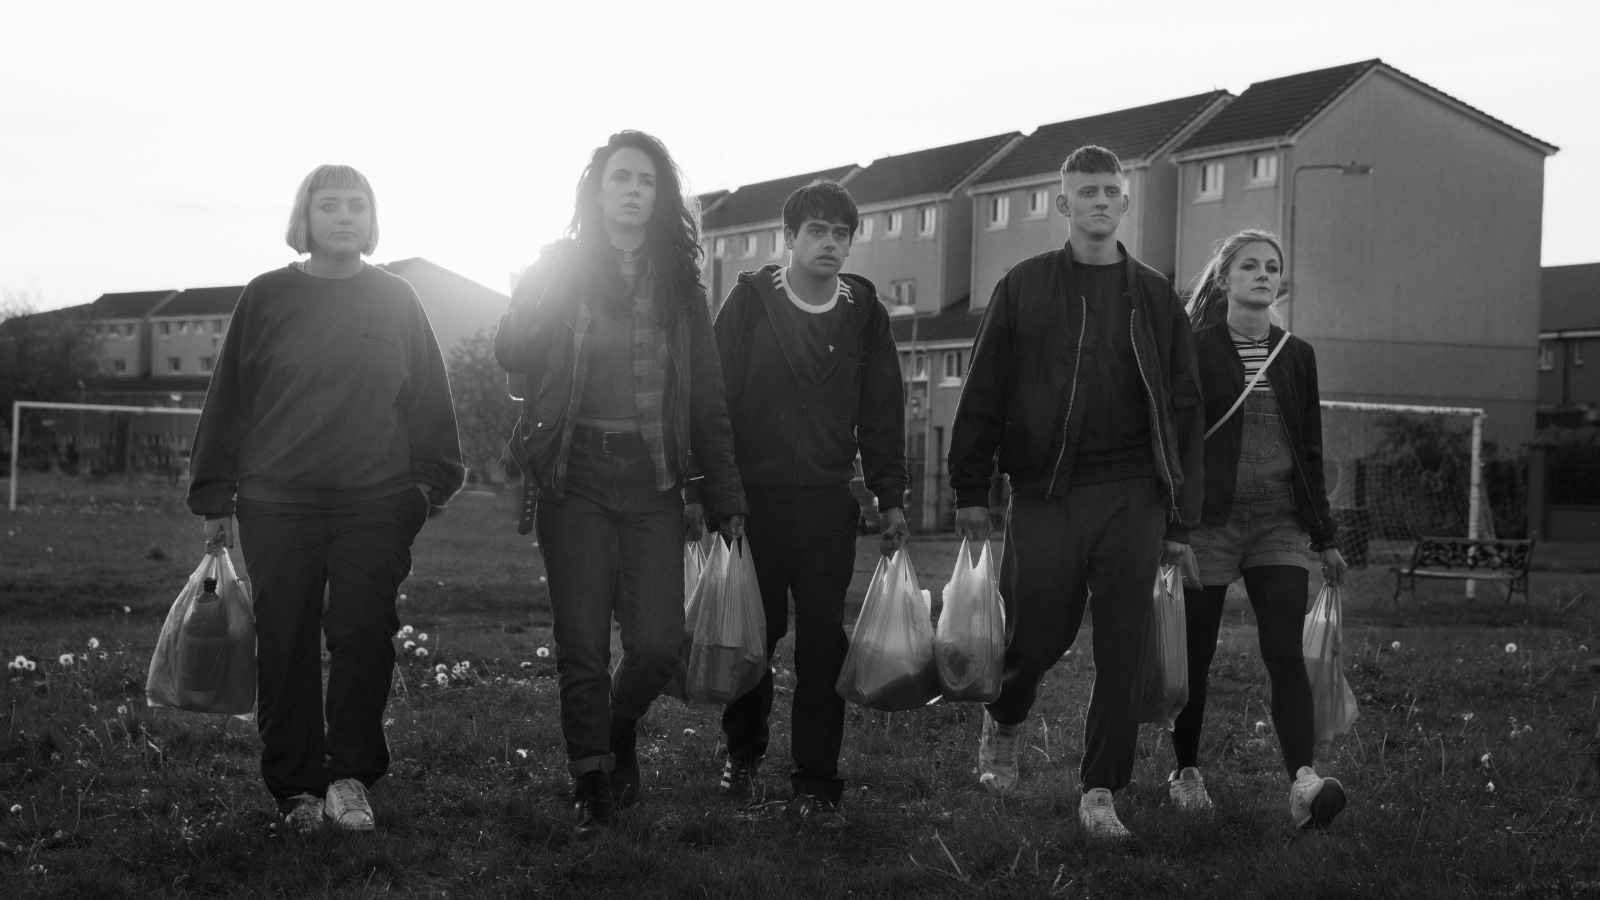 A group of teenagers walk through a grassy field holding plastic bags